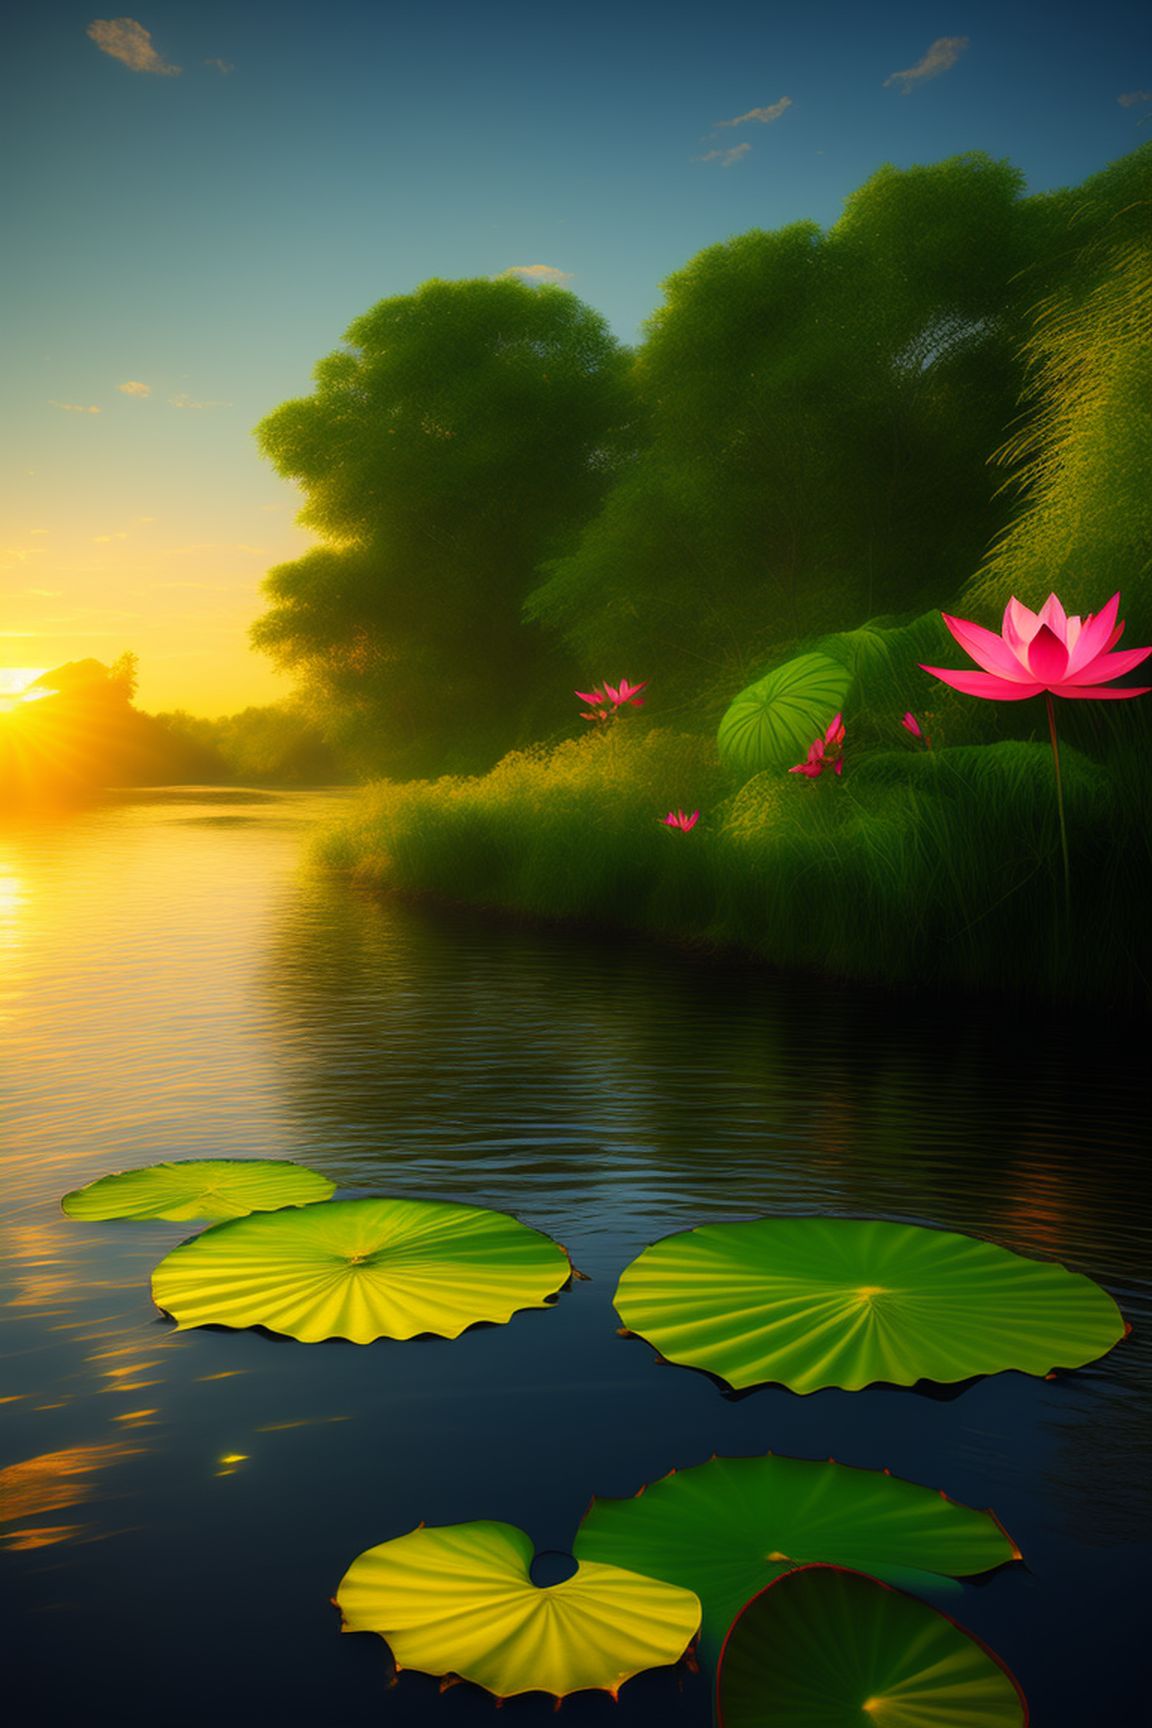 baggy-gnat532: sunrise in background, lotus in river, High resolution ...